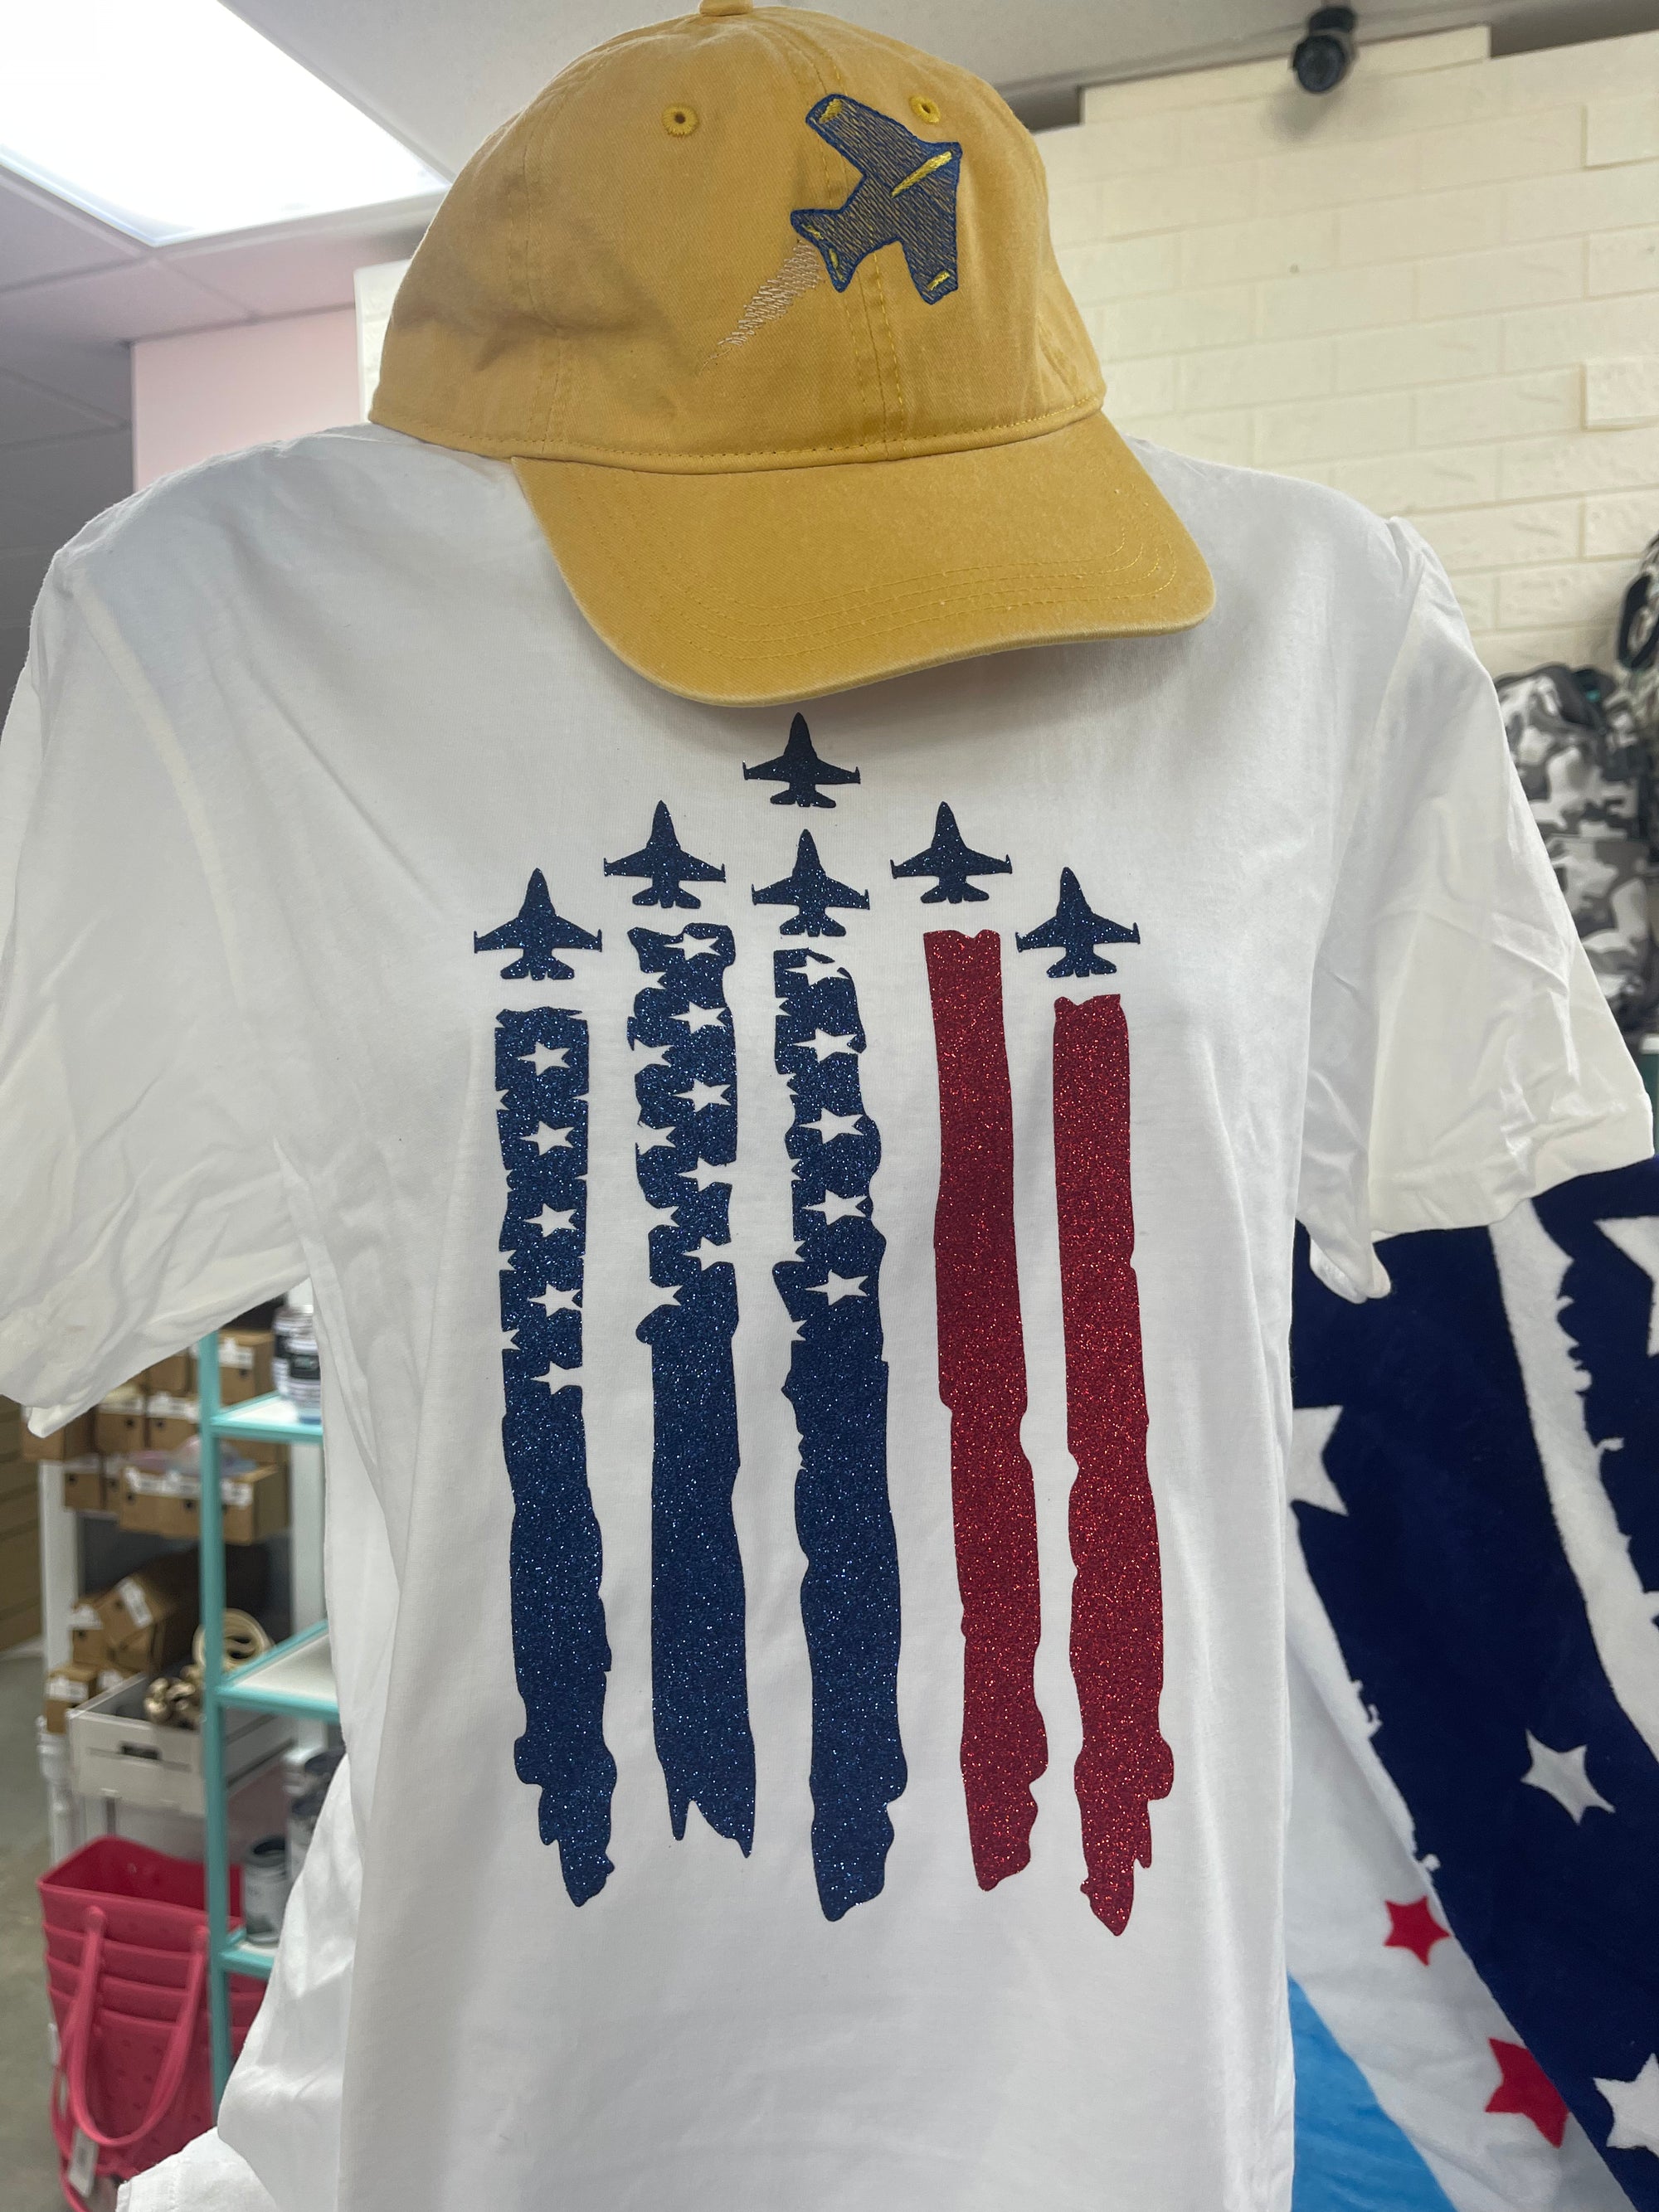 boutique shopping pensacola florida blue angels flag red white blue glitter beach tee t-shirt top clothing